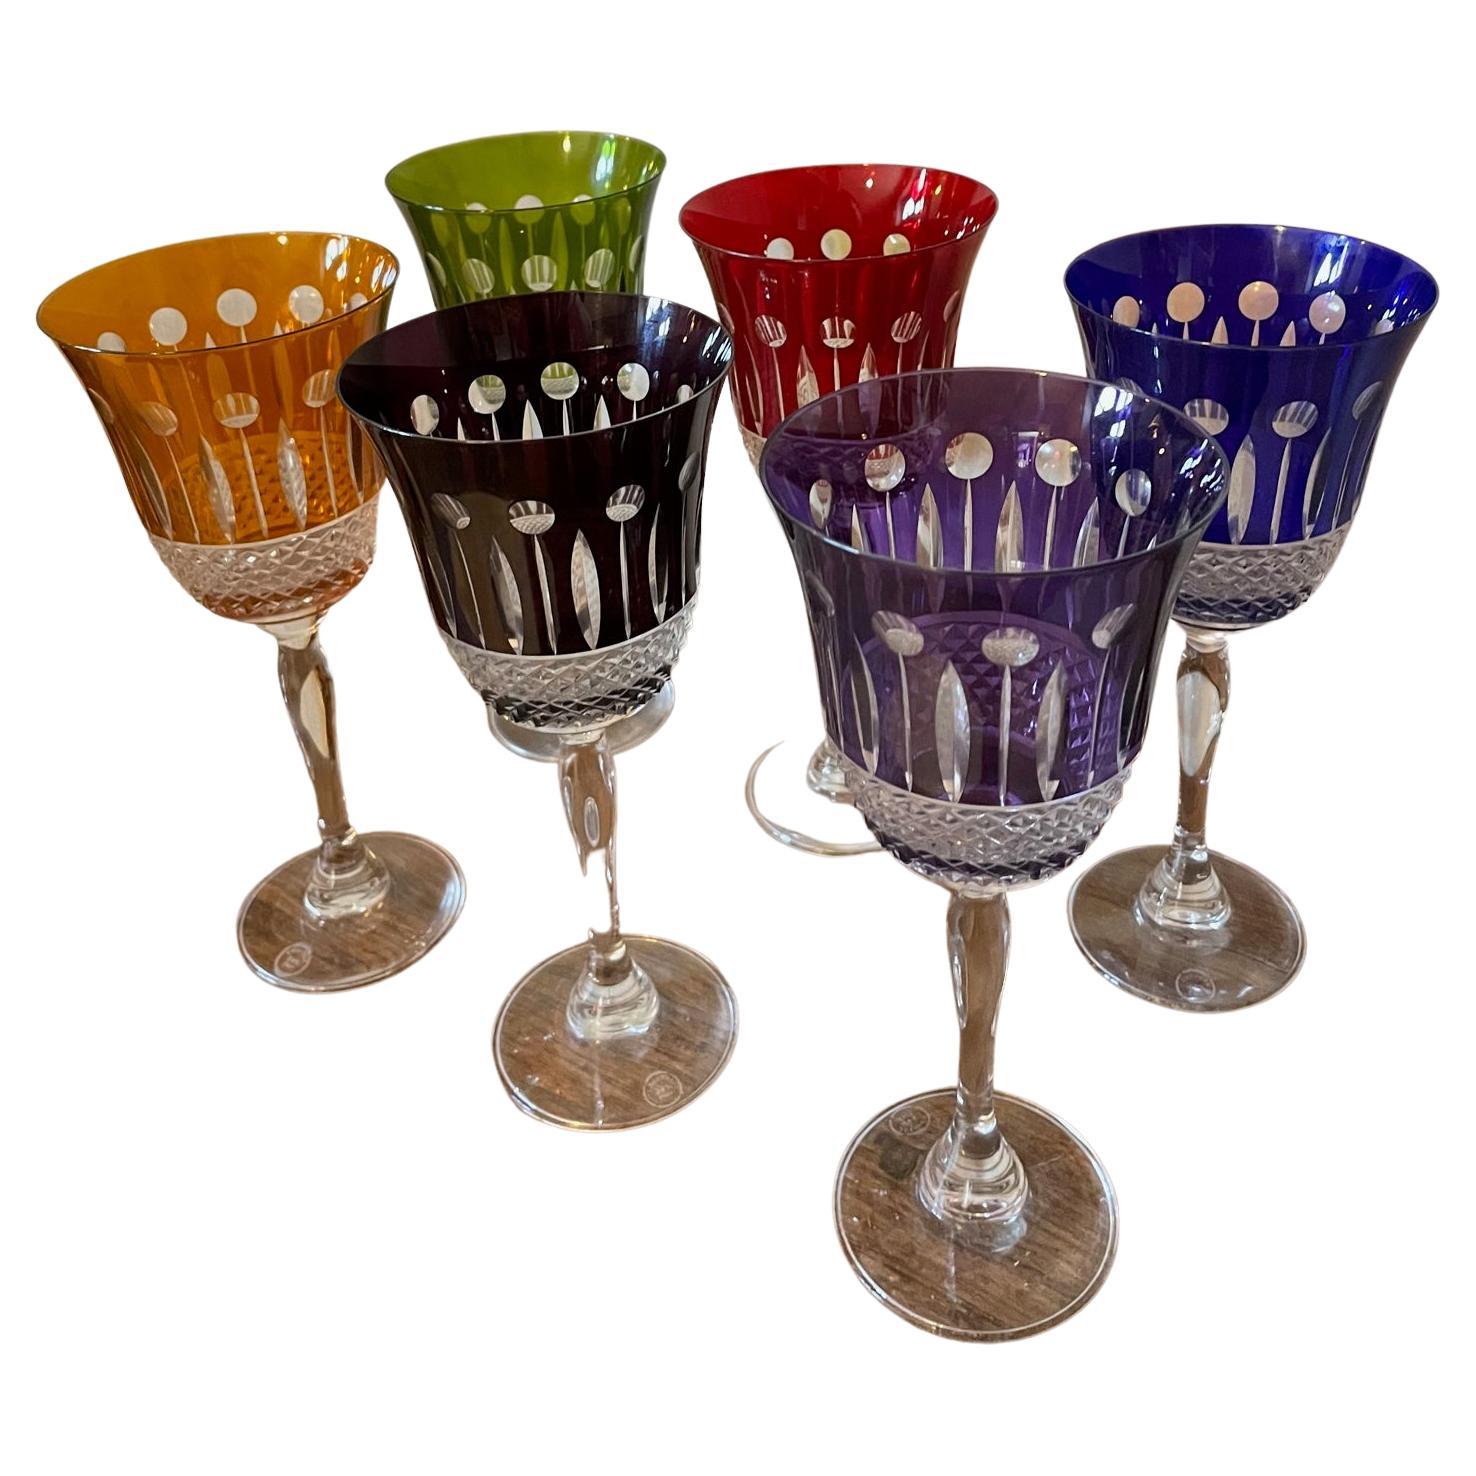 Very nice 6 crystal colored glasses made by the cristallerie de Paris. 
Red, green, orange, black, blue and purple. 
Nice engraved work. Very good quality and condition.